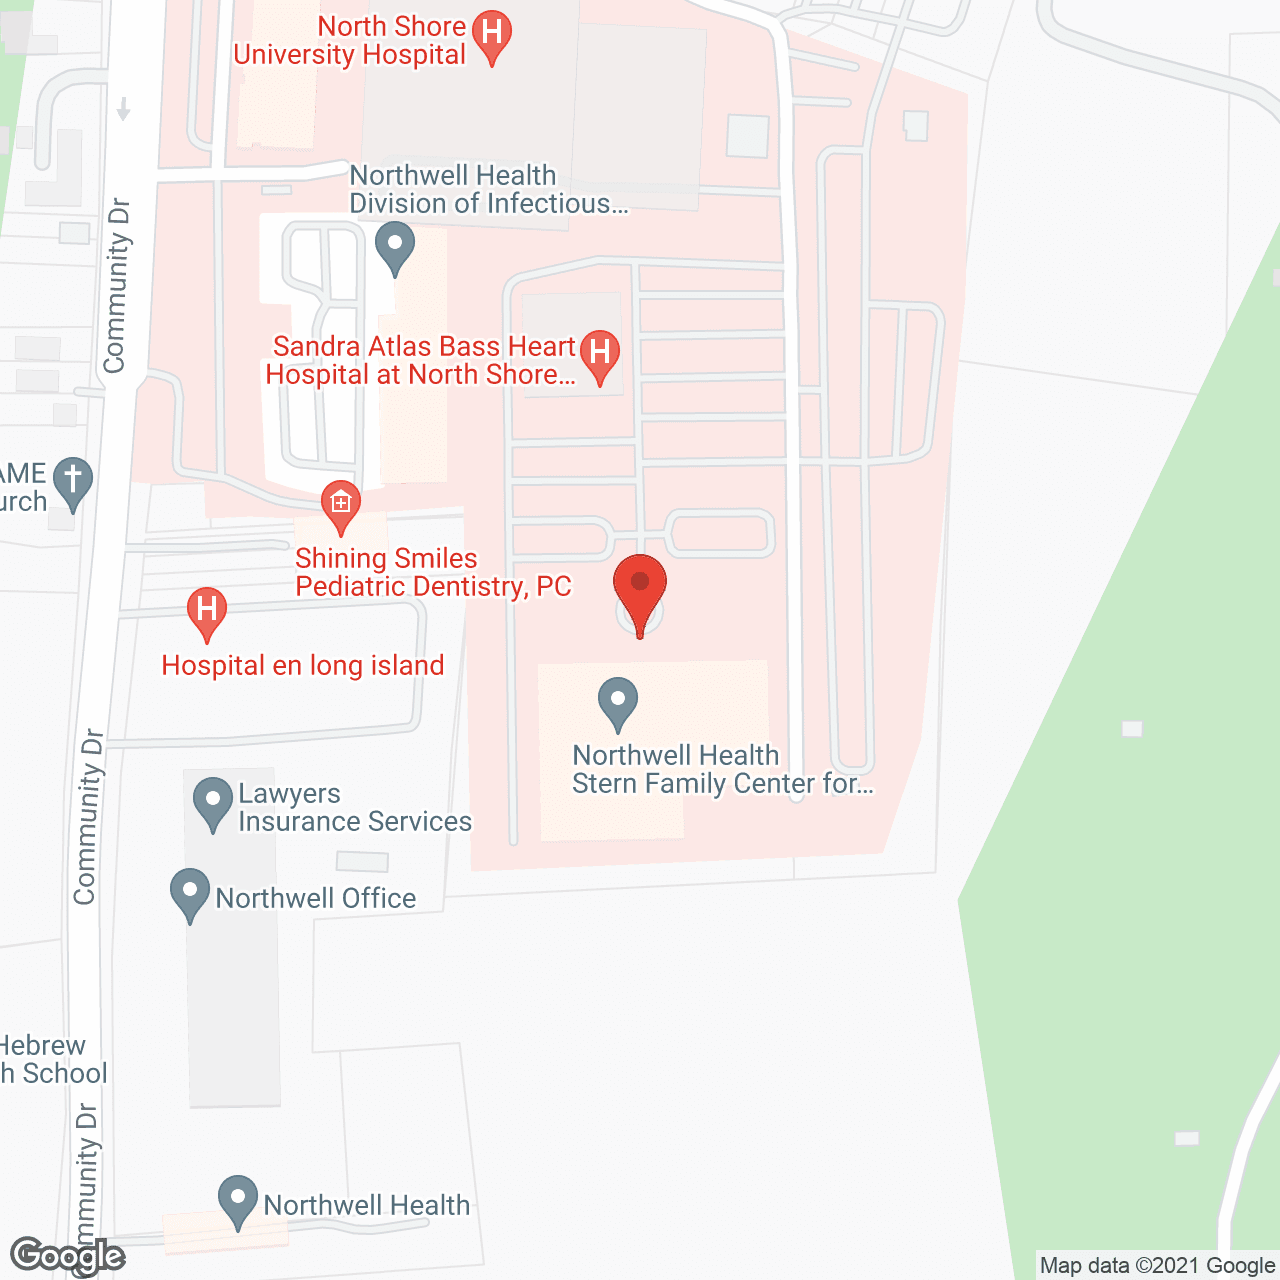 Stern Family Center For Extended Care and Rehabilitation in google map